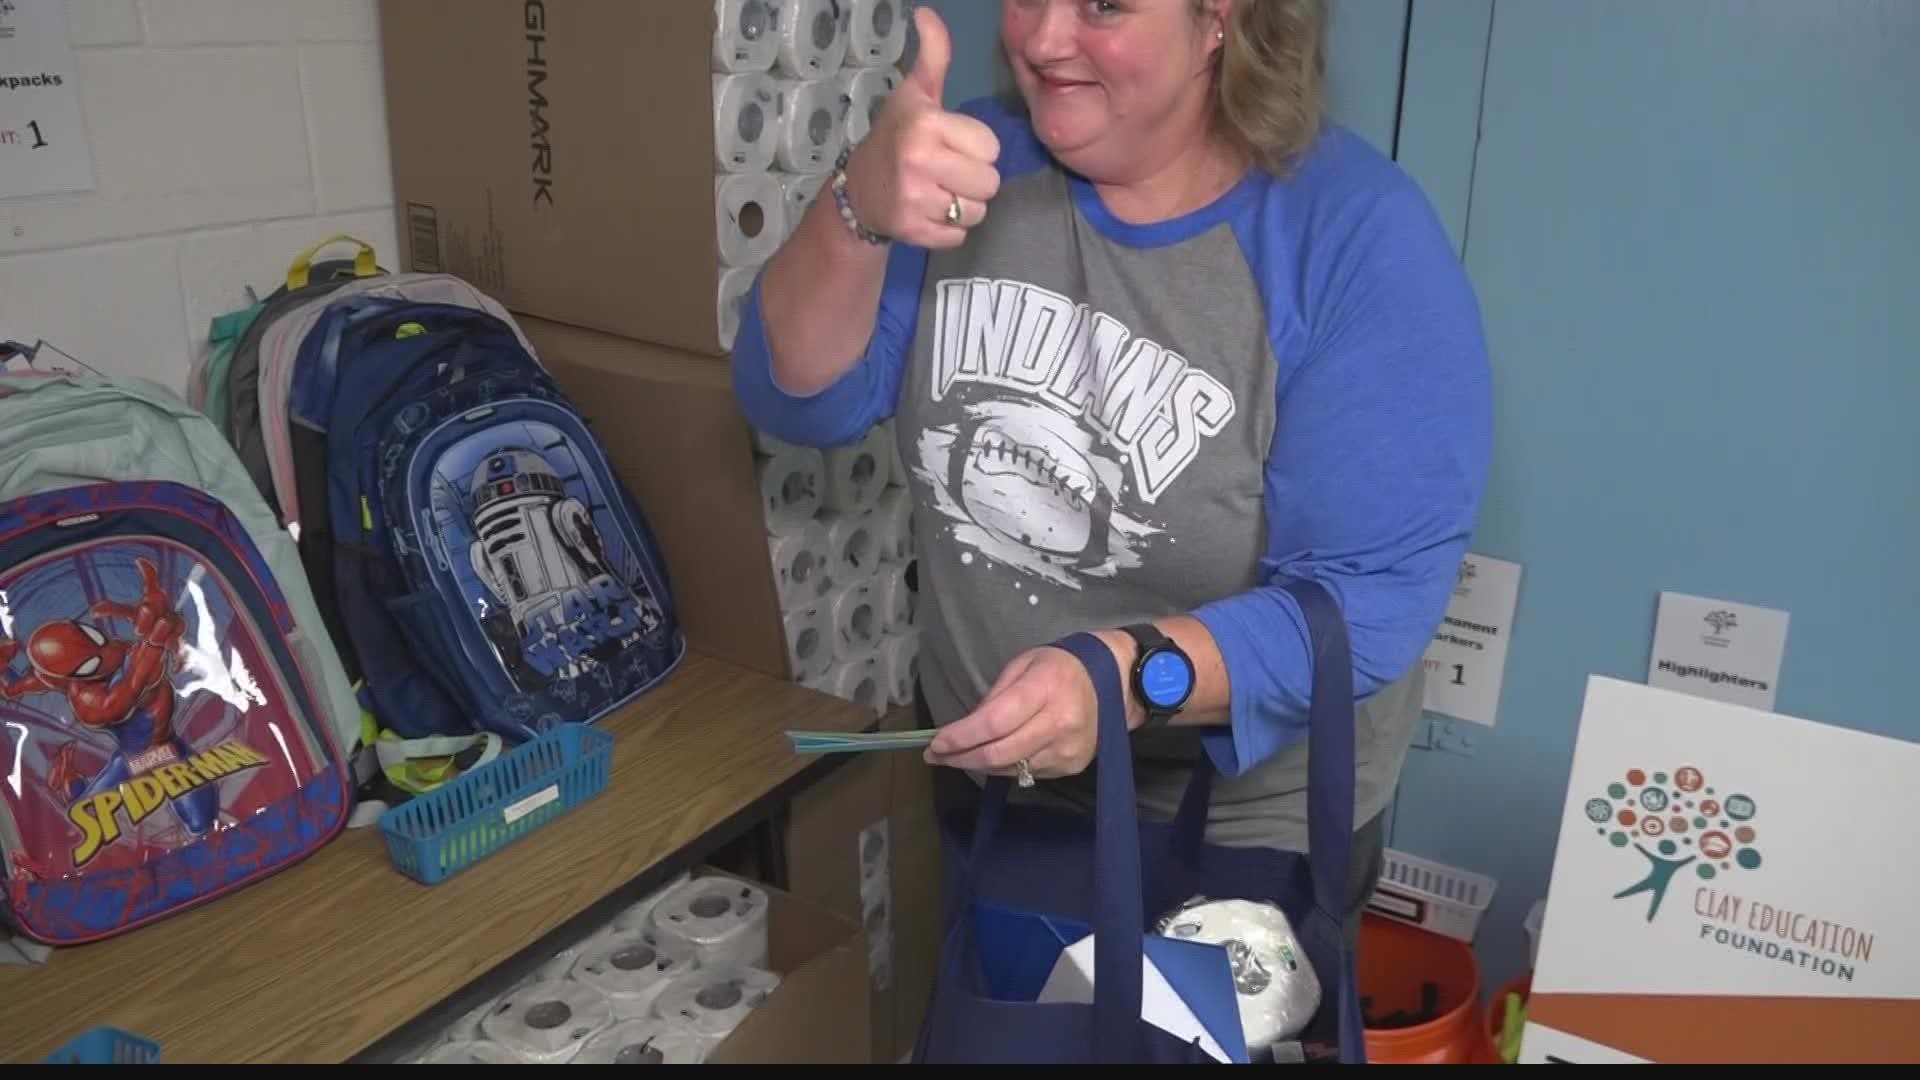 The Clay Education Foundation opened a second shop in Keystone Heights Wednesday where Clay County public school teachers can get school supplies for free.